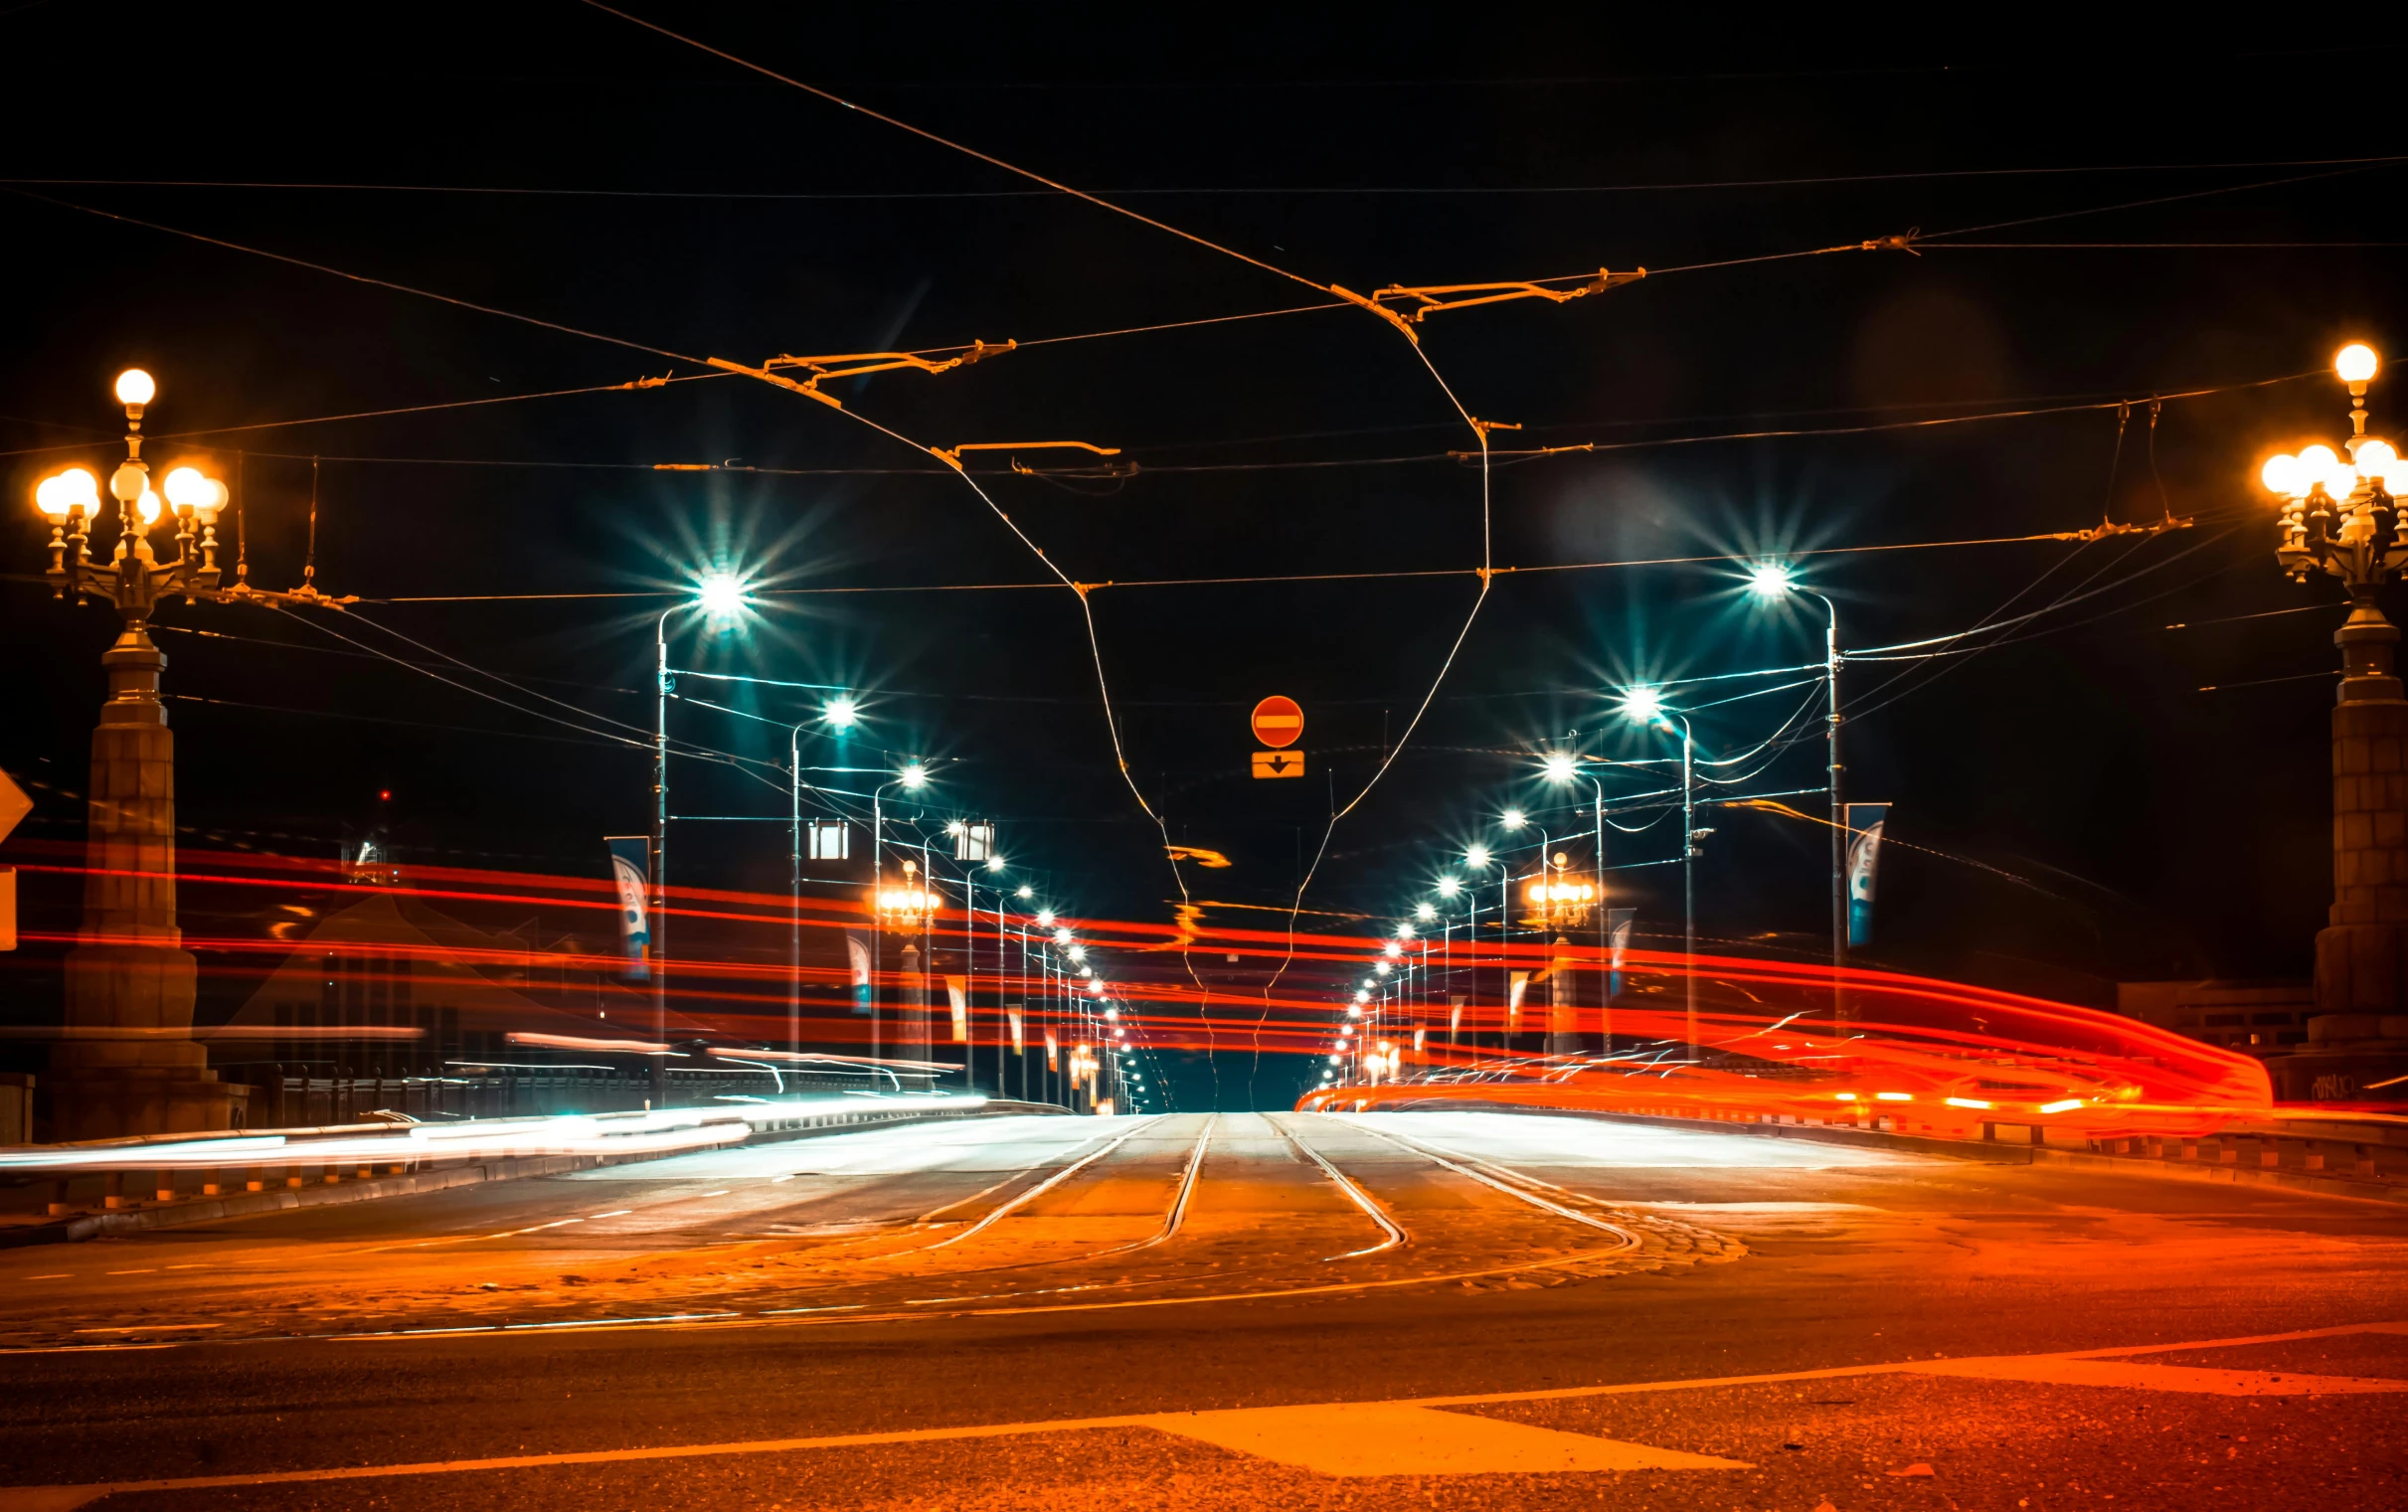 a city street filled with lots of traffic at night, a picture, by Thomas Häfner, pexels contest winner, electricity archs, orange teal lighting, speed lines, magical soviet town